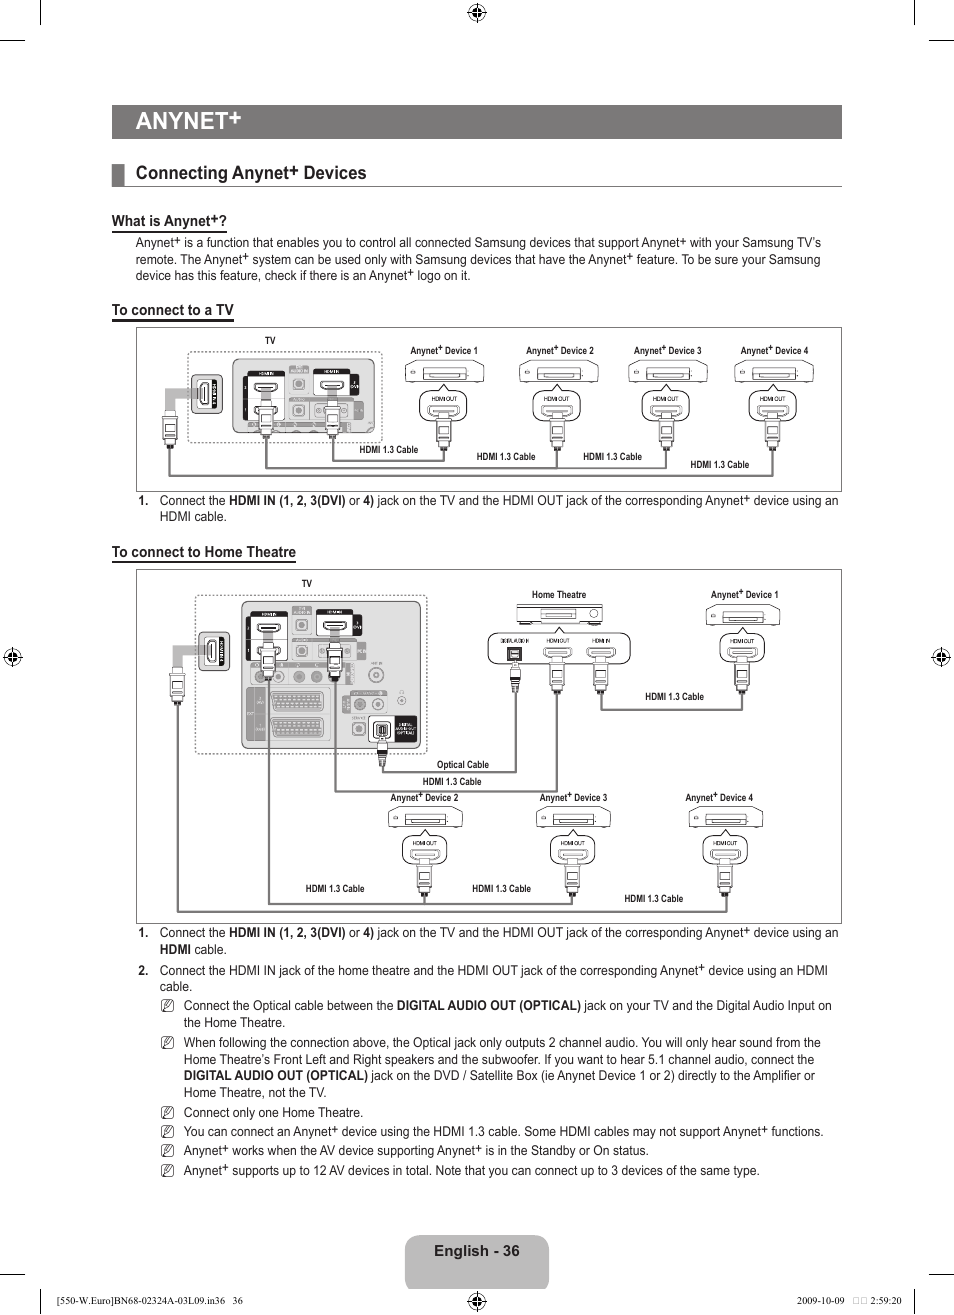 Anynet, Connecting anynet+ devices | Samsung LE32B550A5P User Manual